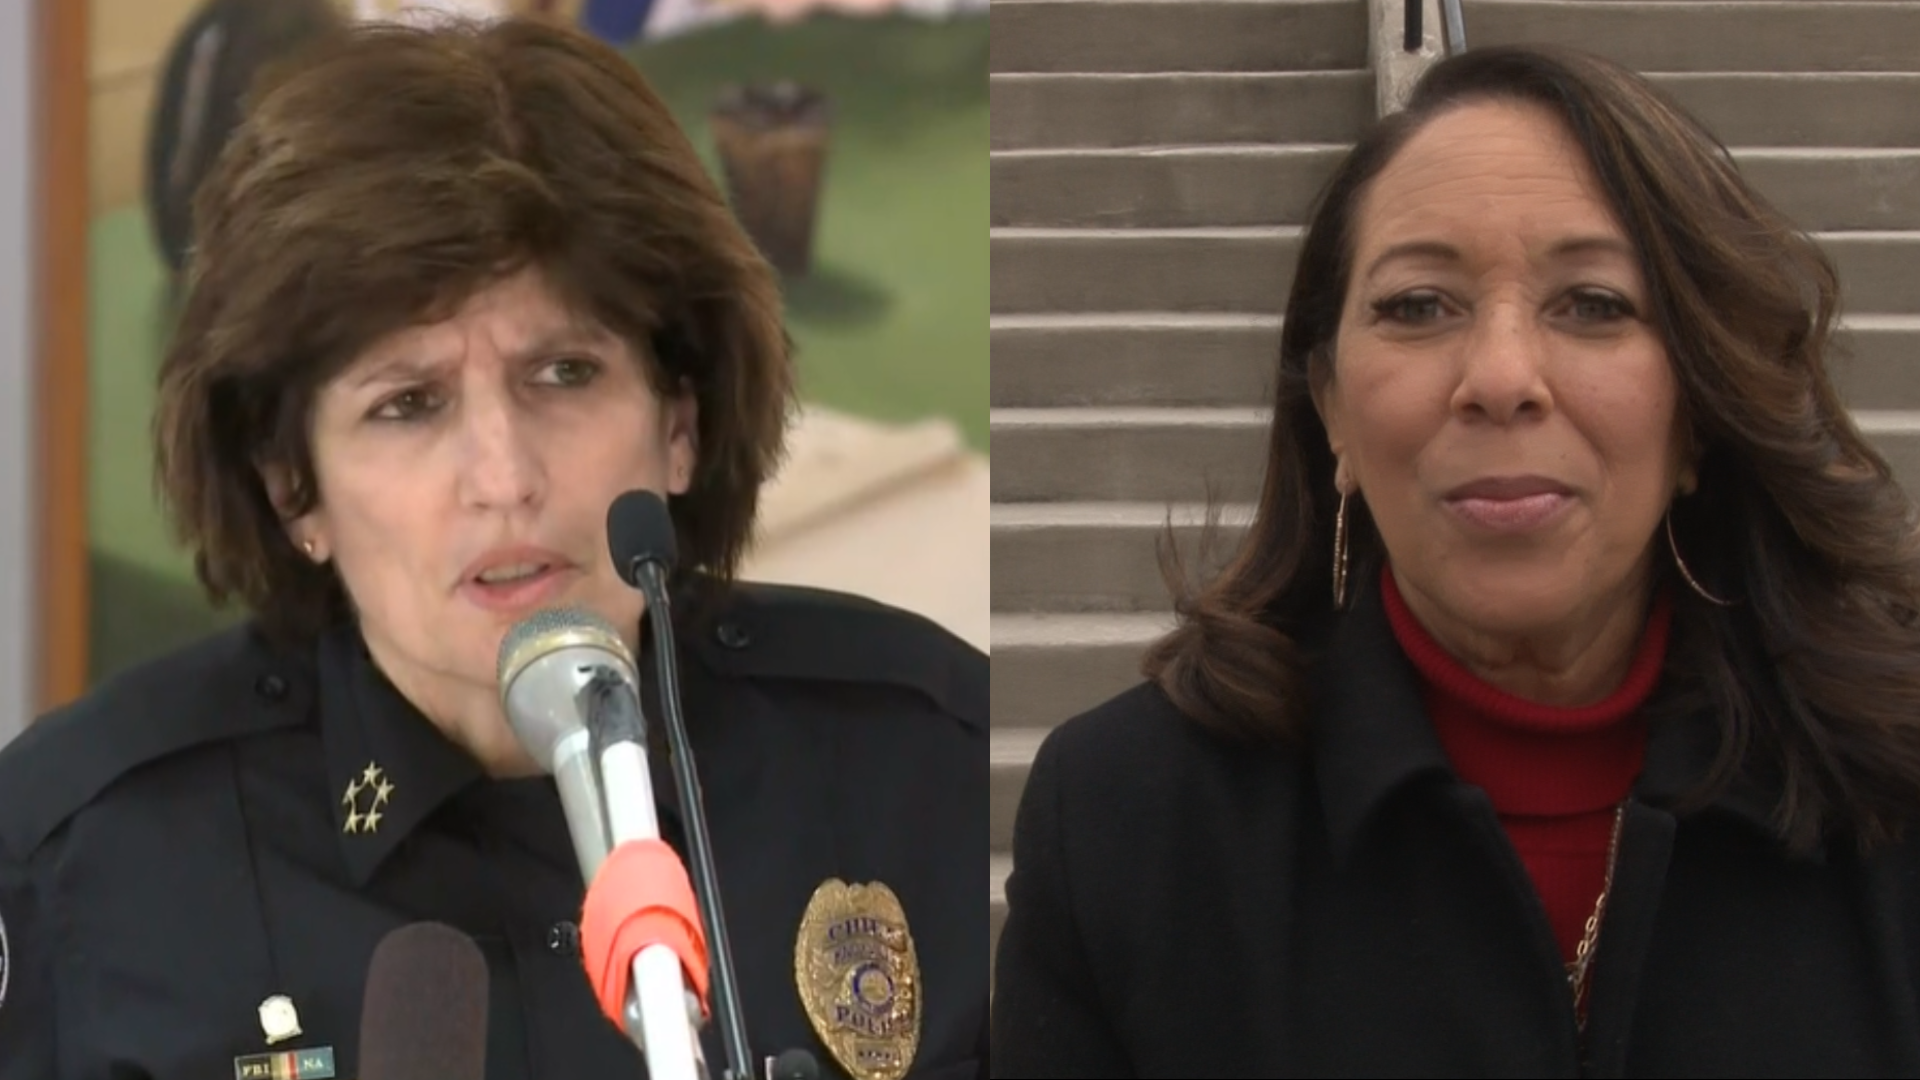 Vice Mayor Gwen McKenzie said Thursday that she has lost confidence in Police Chief Eve Thomas.